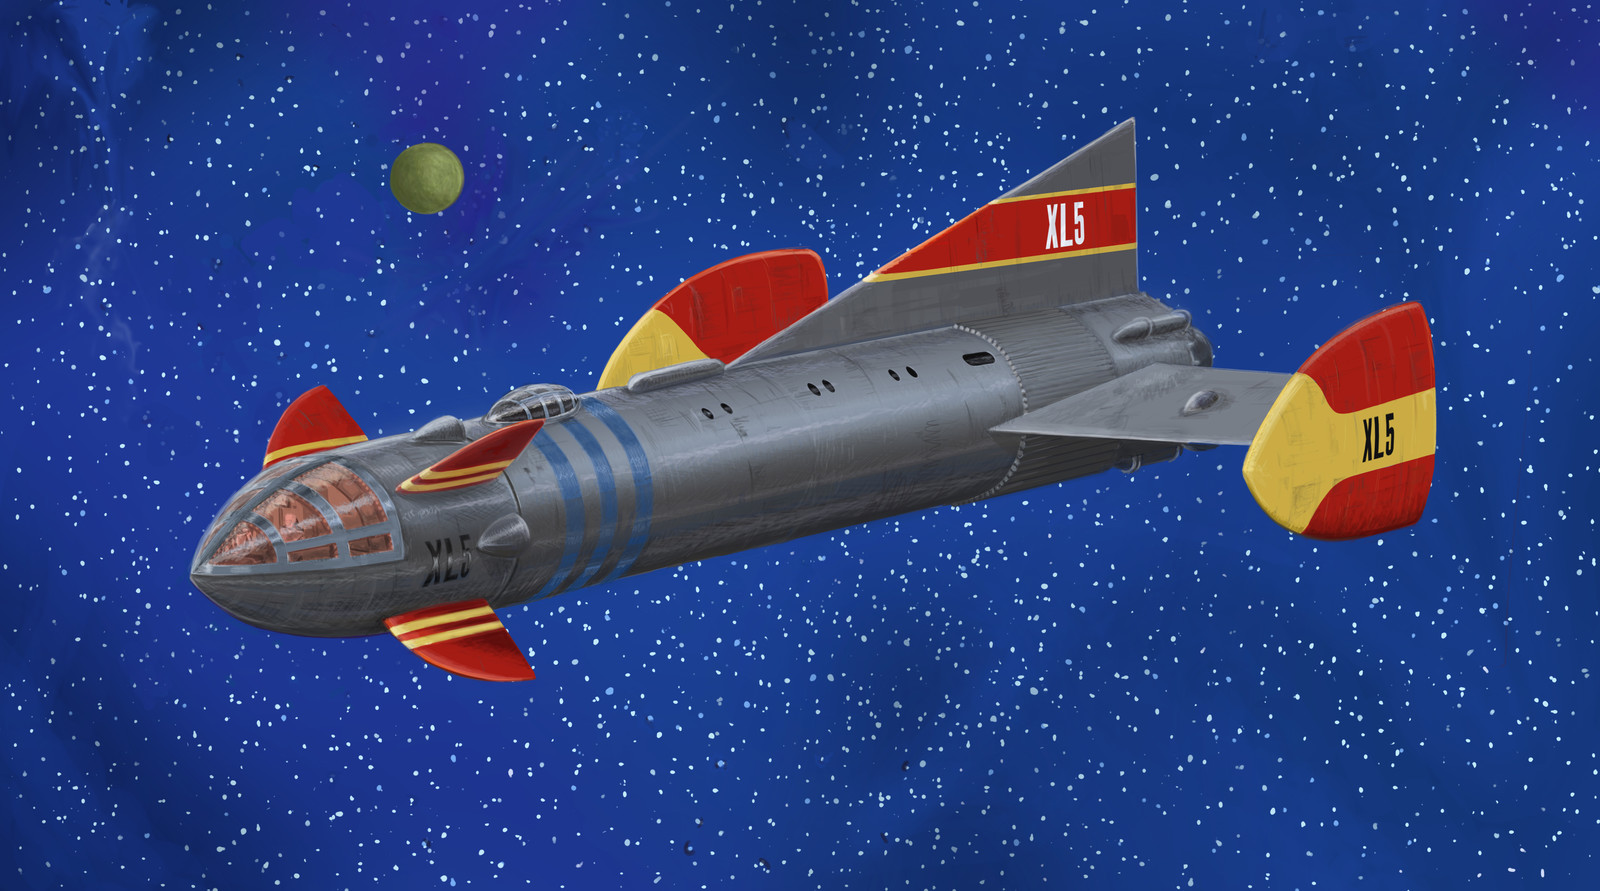 FIREBALL XL5
The super spaceship, 'Fireball XL5'. The flagship of the World Space Patrol with the crew of Captain Steve Zodiac, Venus, Professor Matic and Robert the Robot explored and protected outer space.